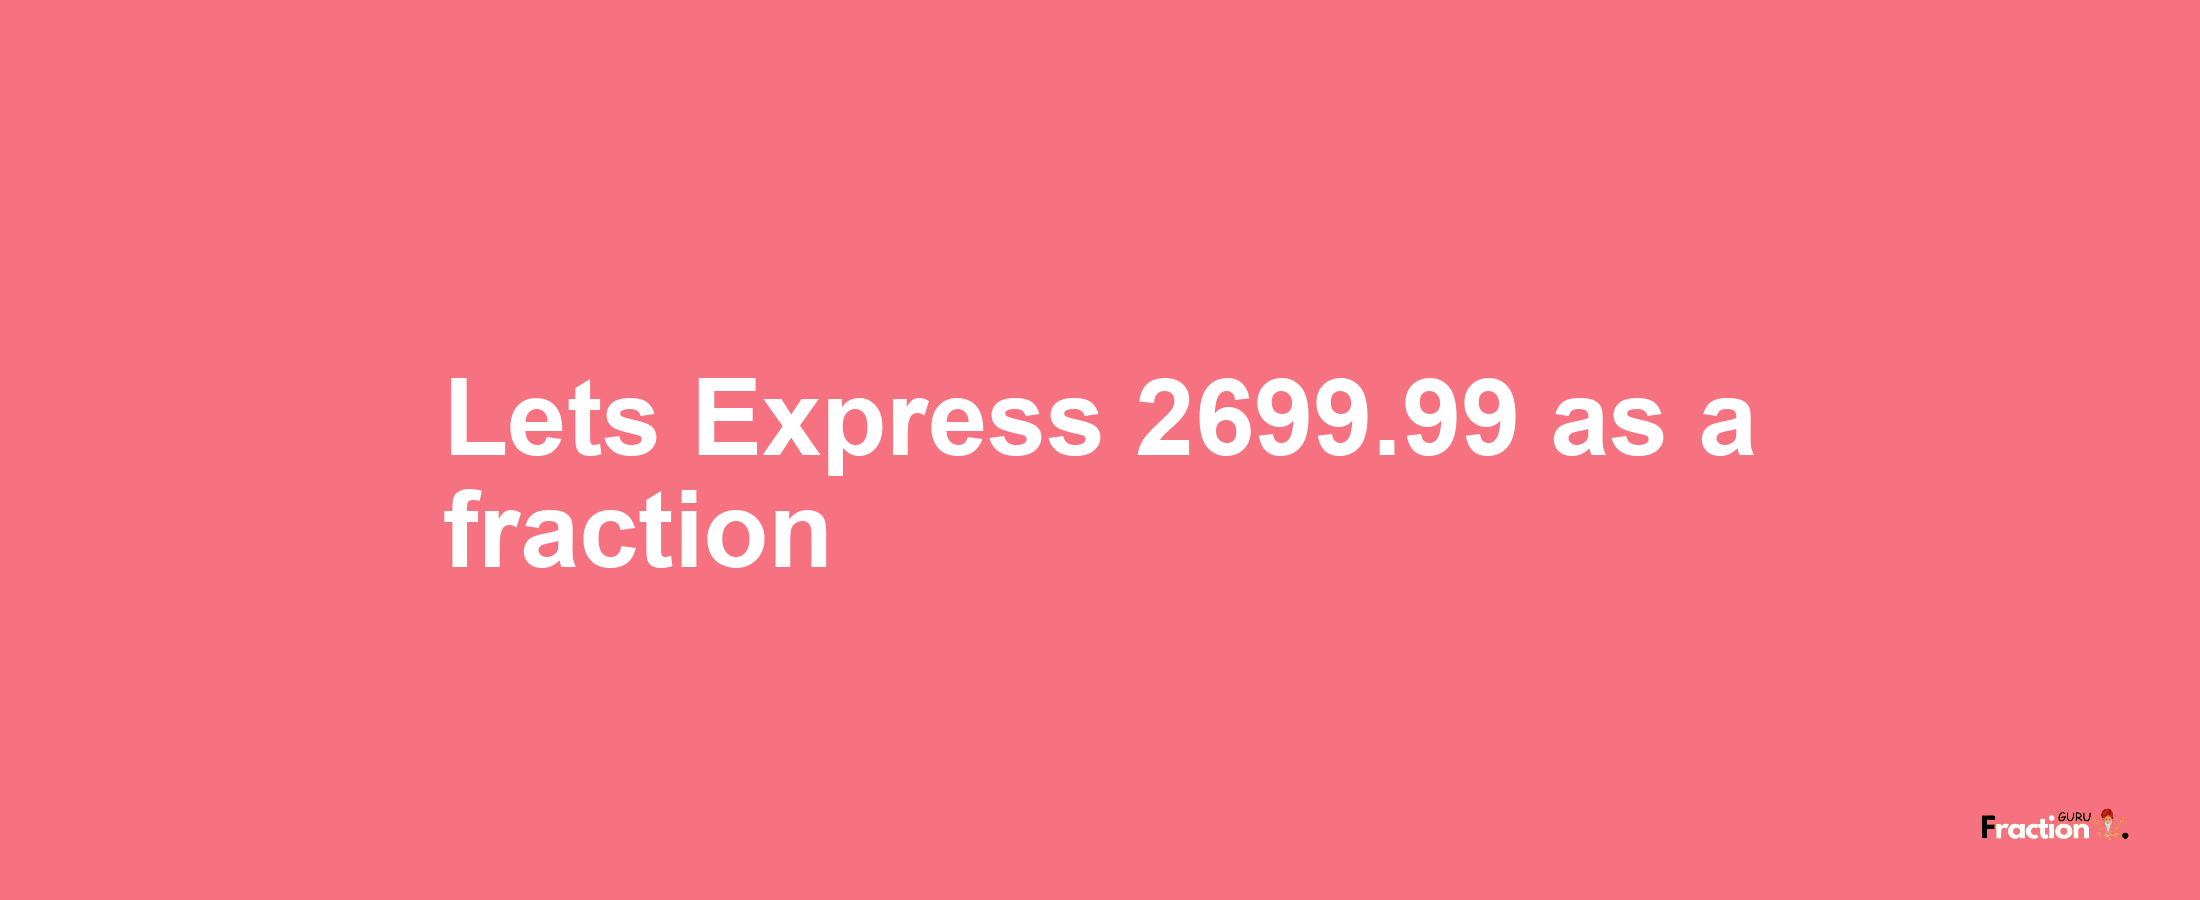 Lets Express 2699.99 as afraction